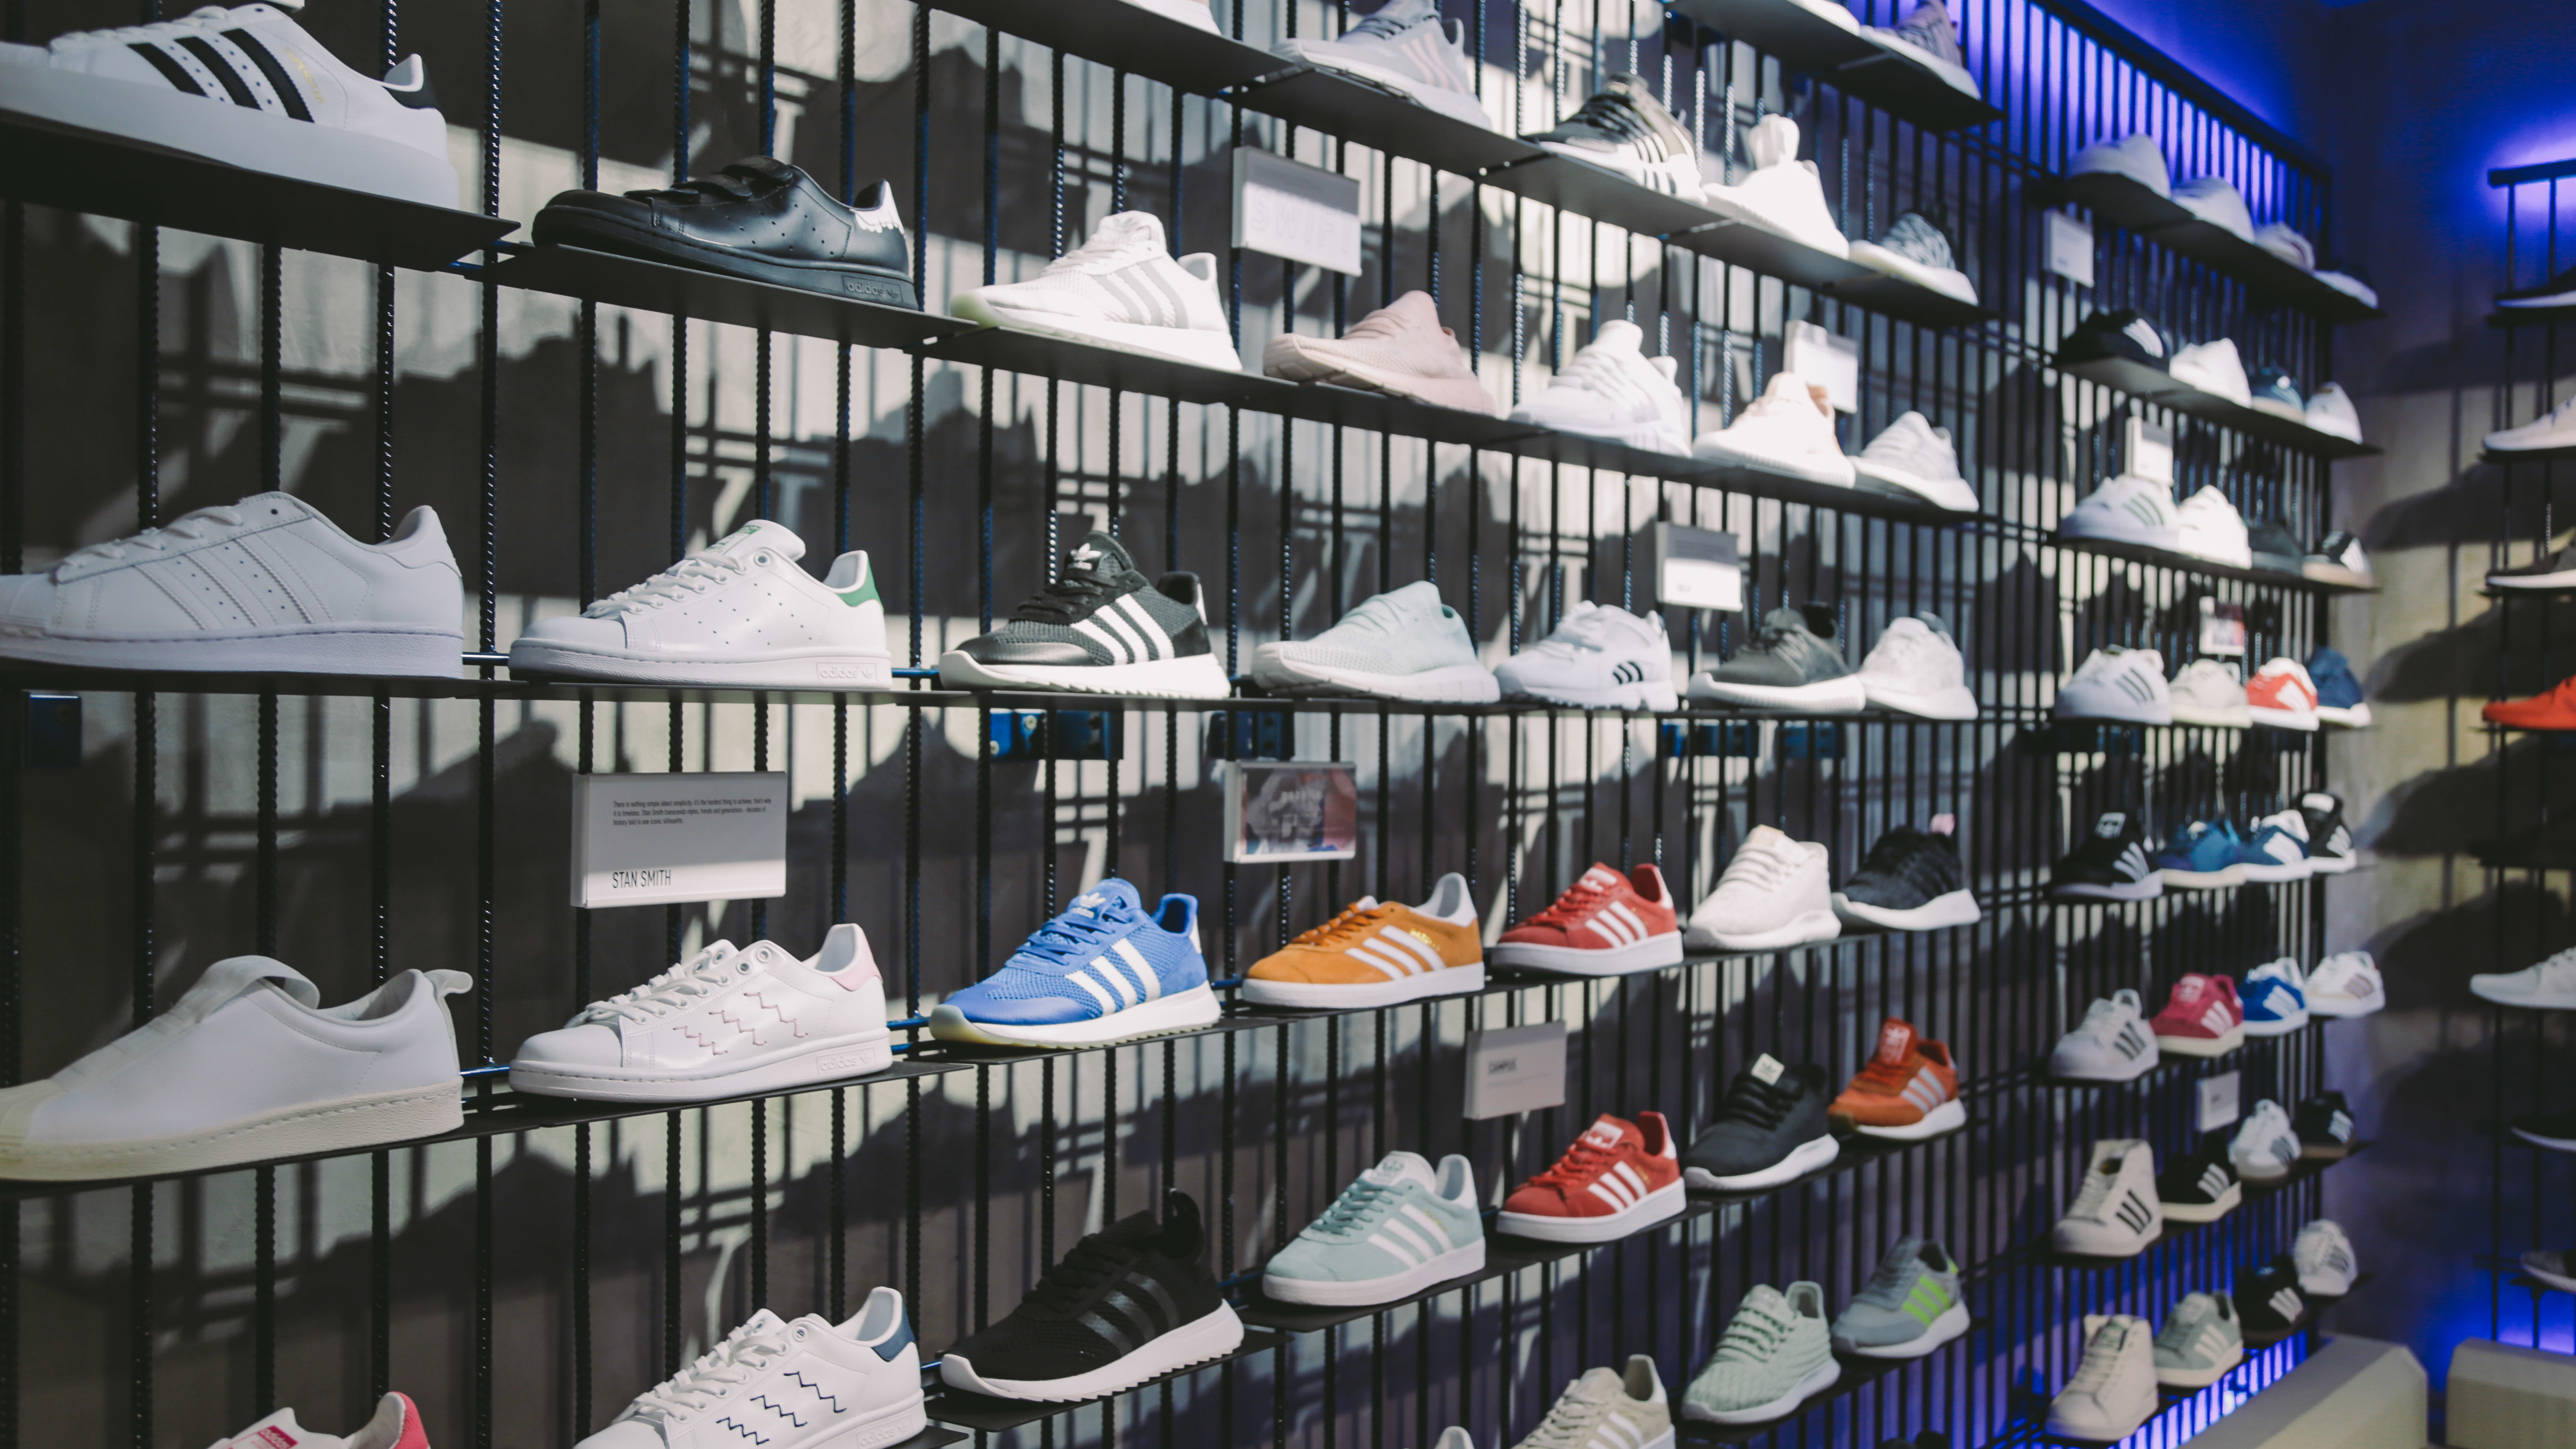 Adidas Is Stores in North America Europe Amid Coronavirus Concerns Sole